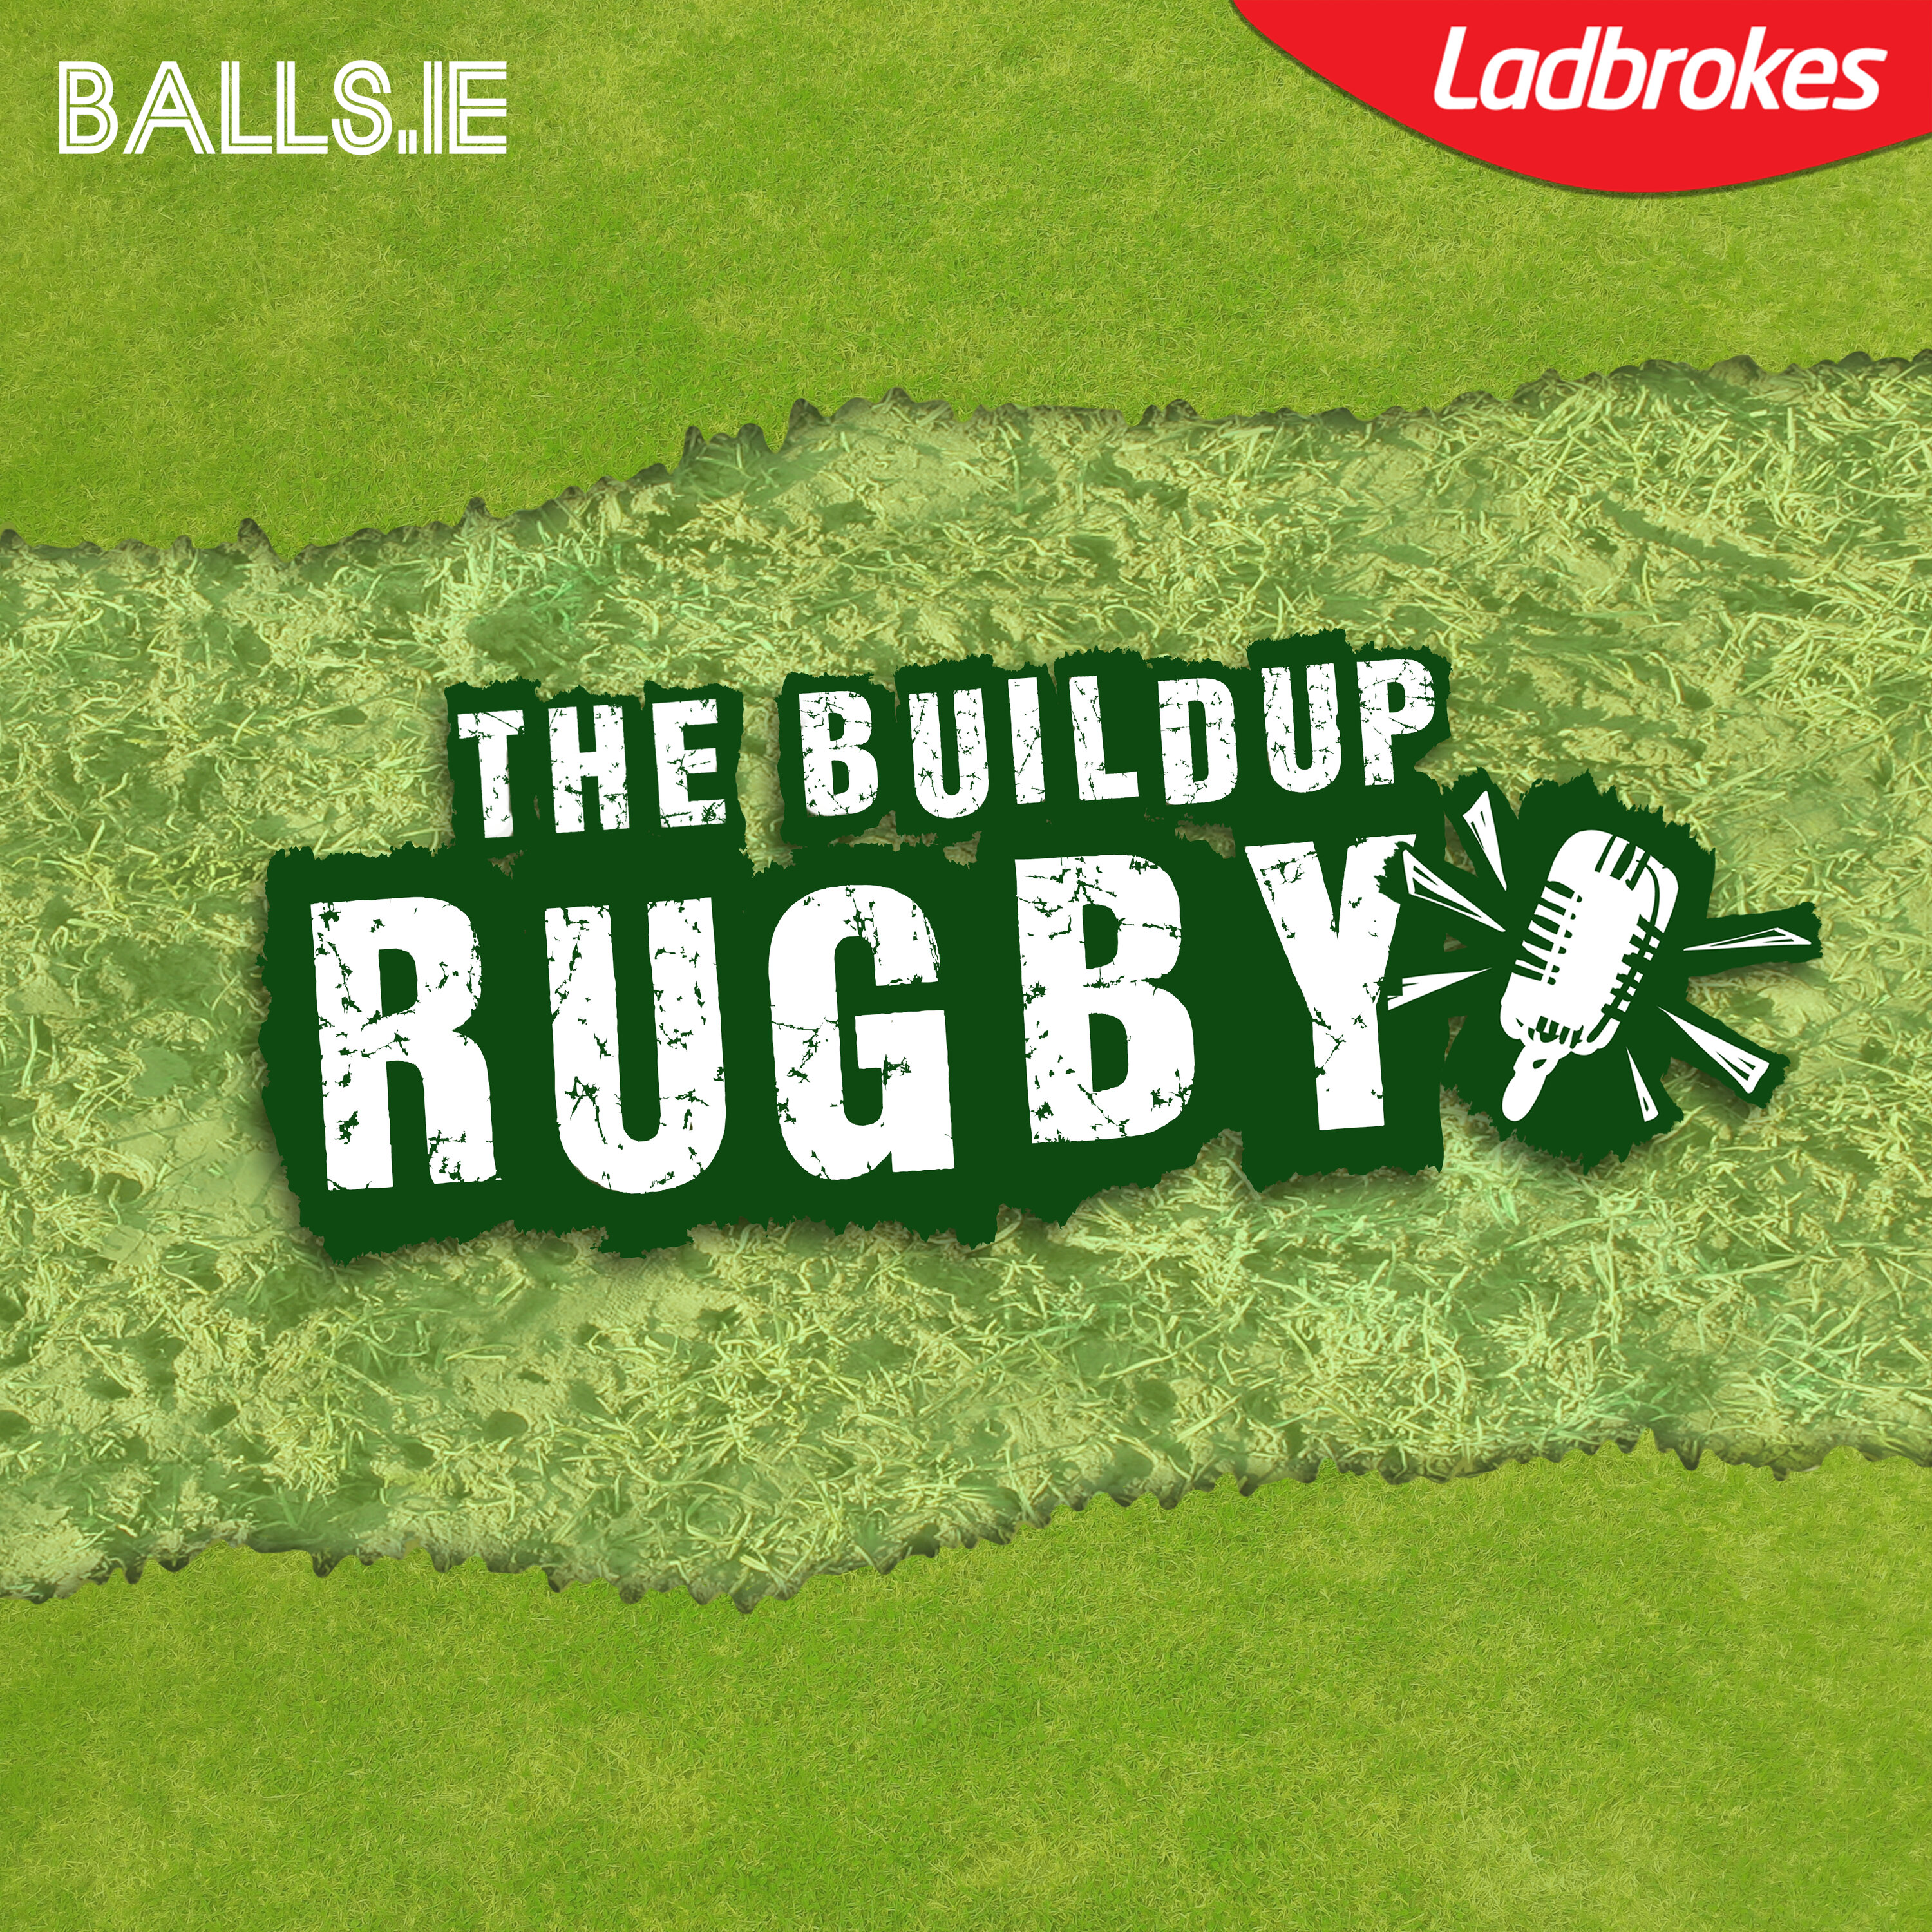 The Buildup - The Lions with Stephen Ferris